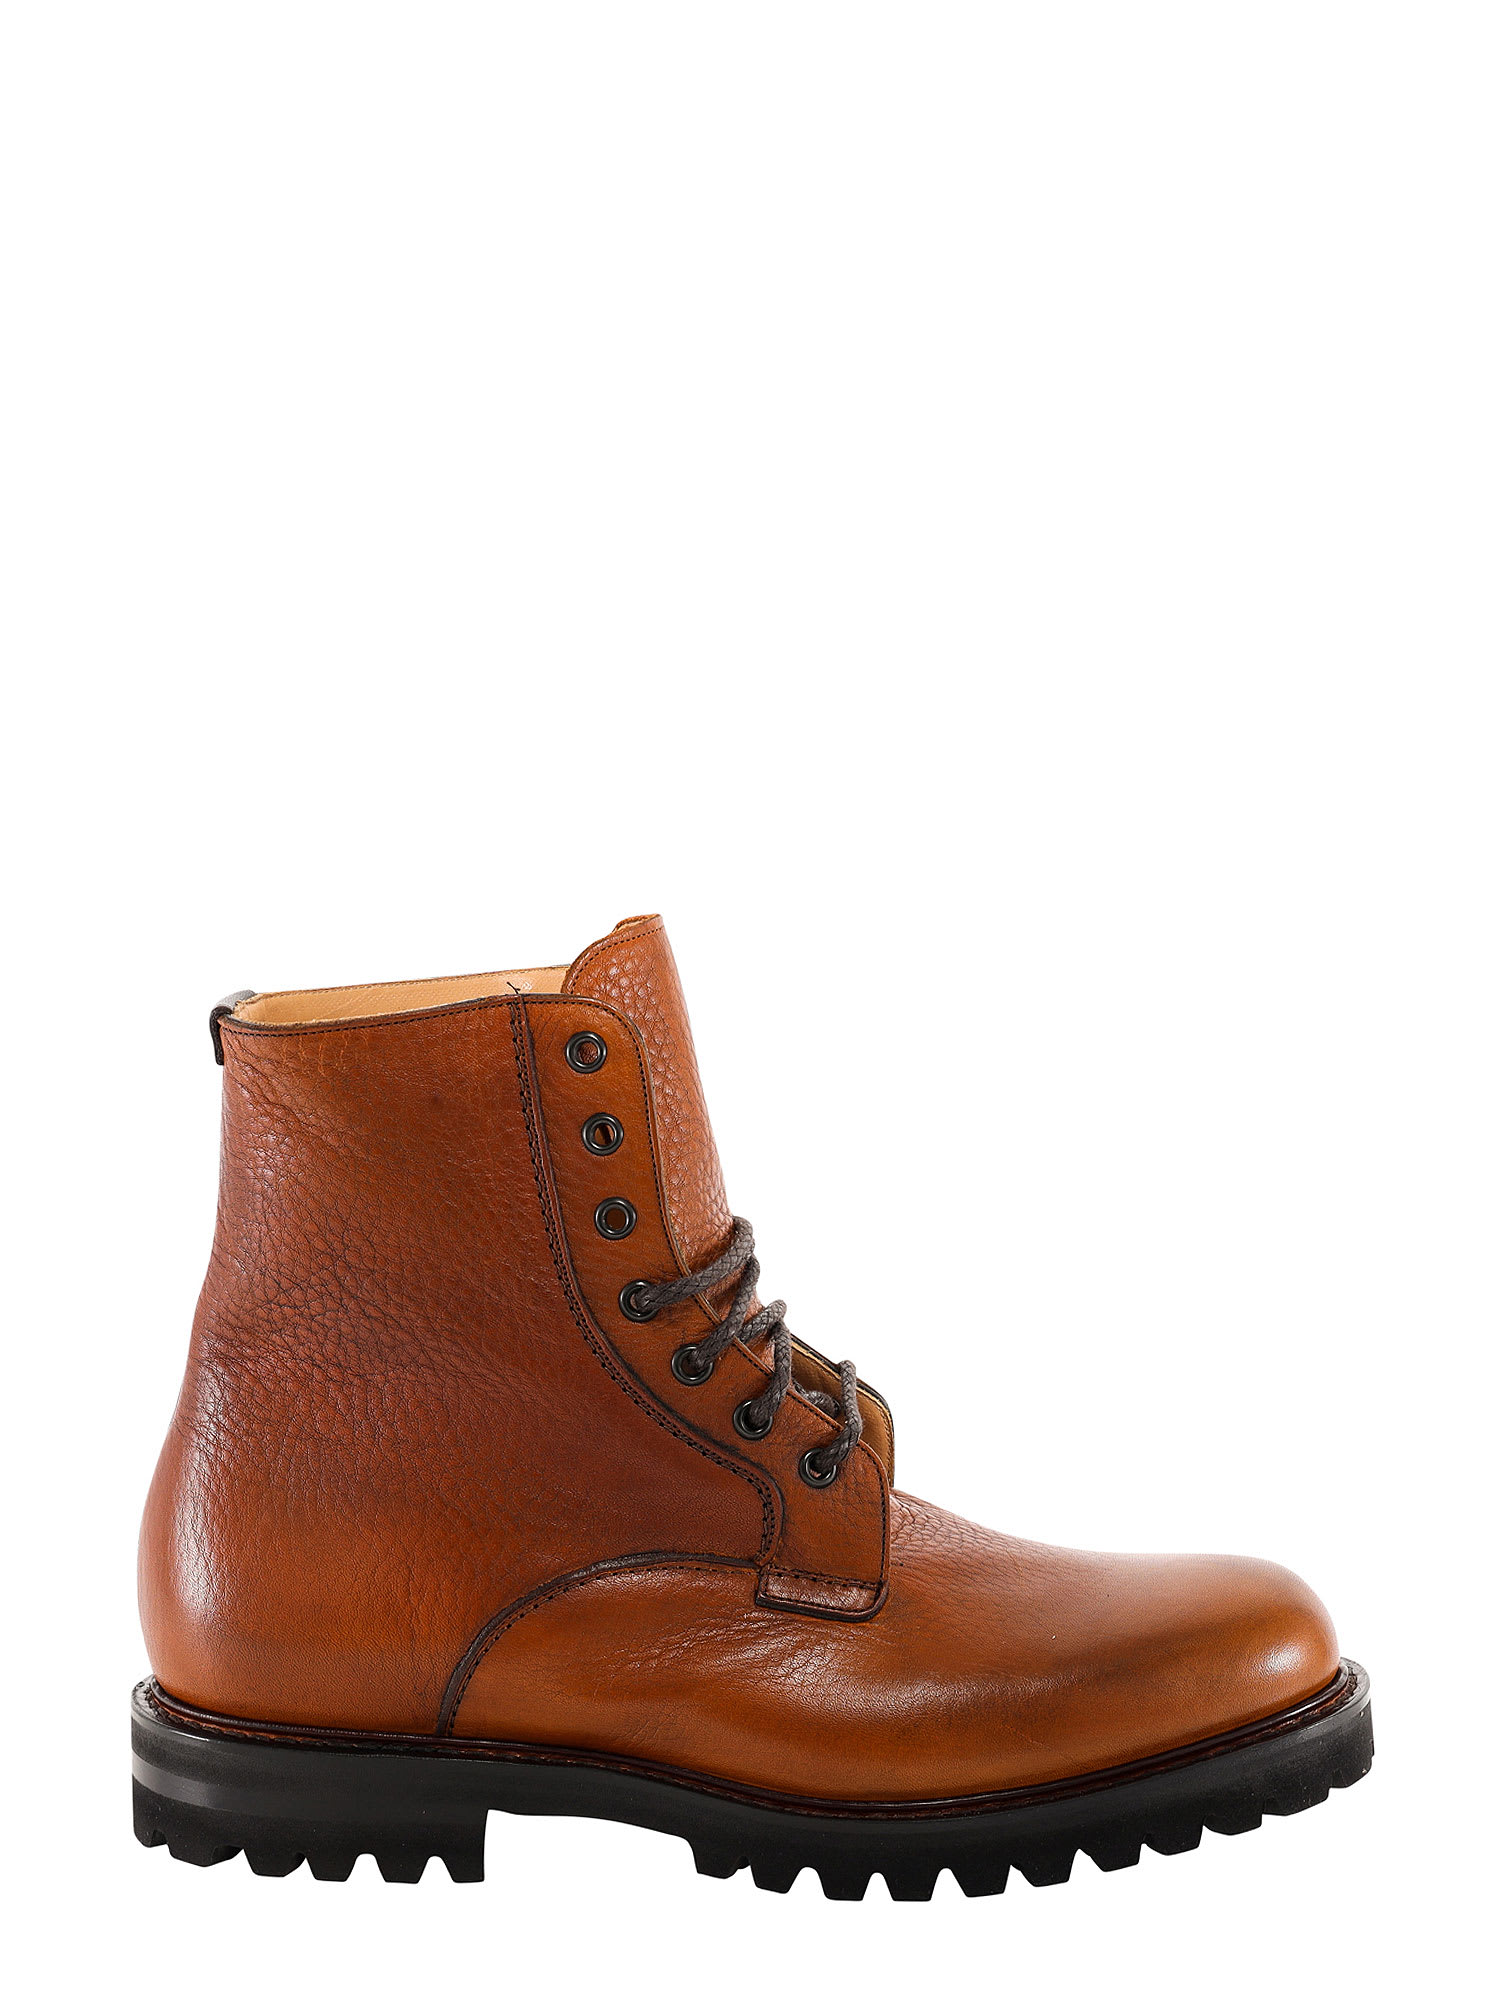 Churchs Lace-up Boots